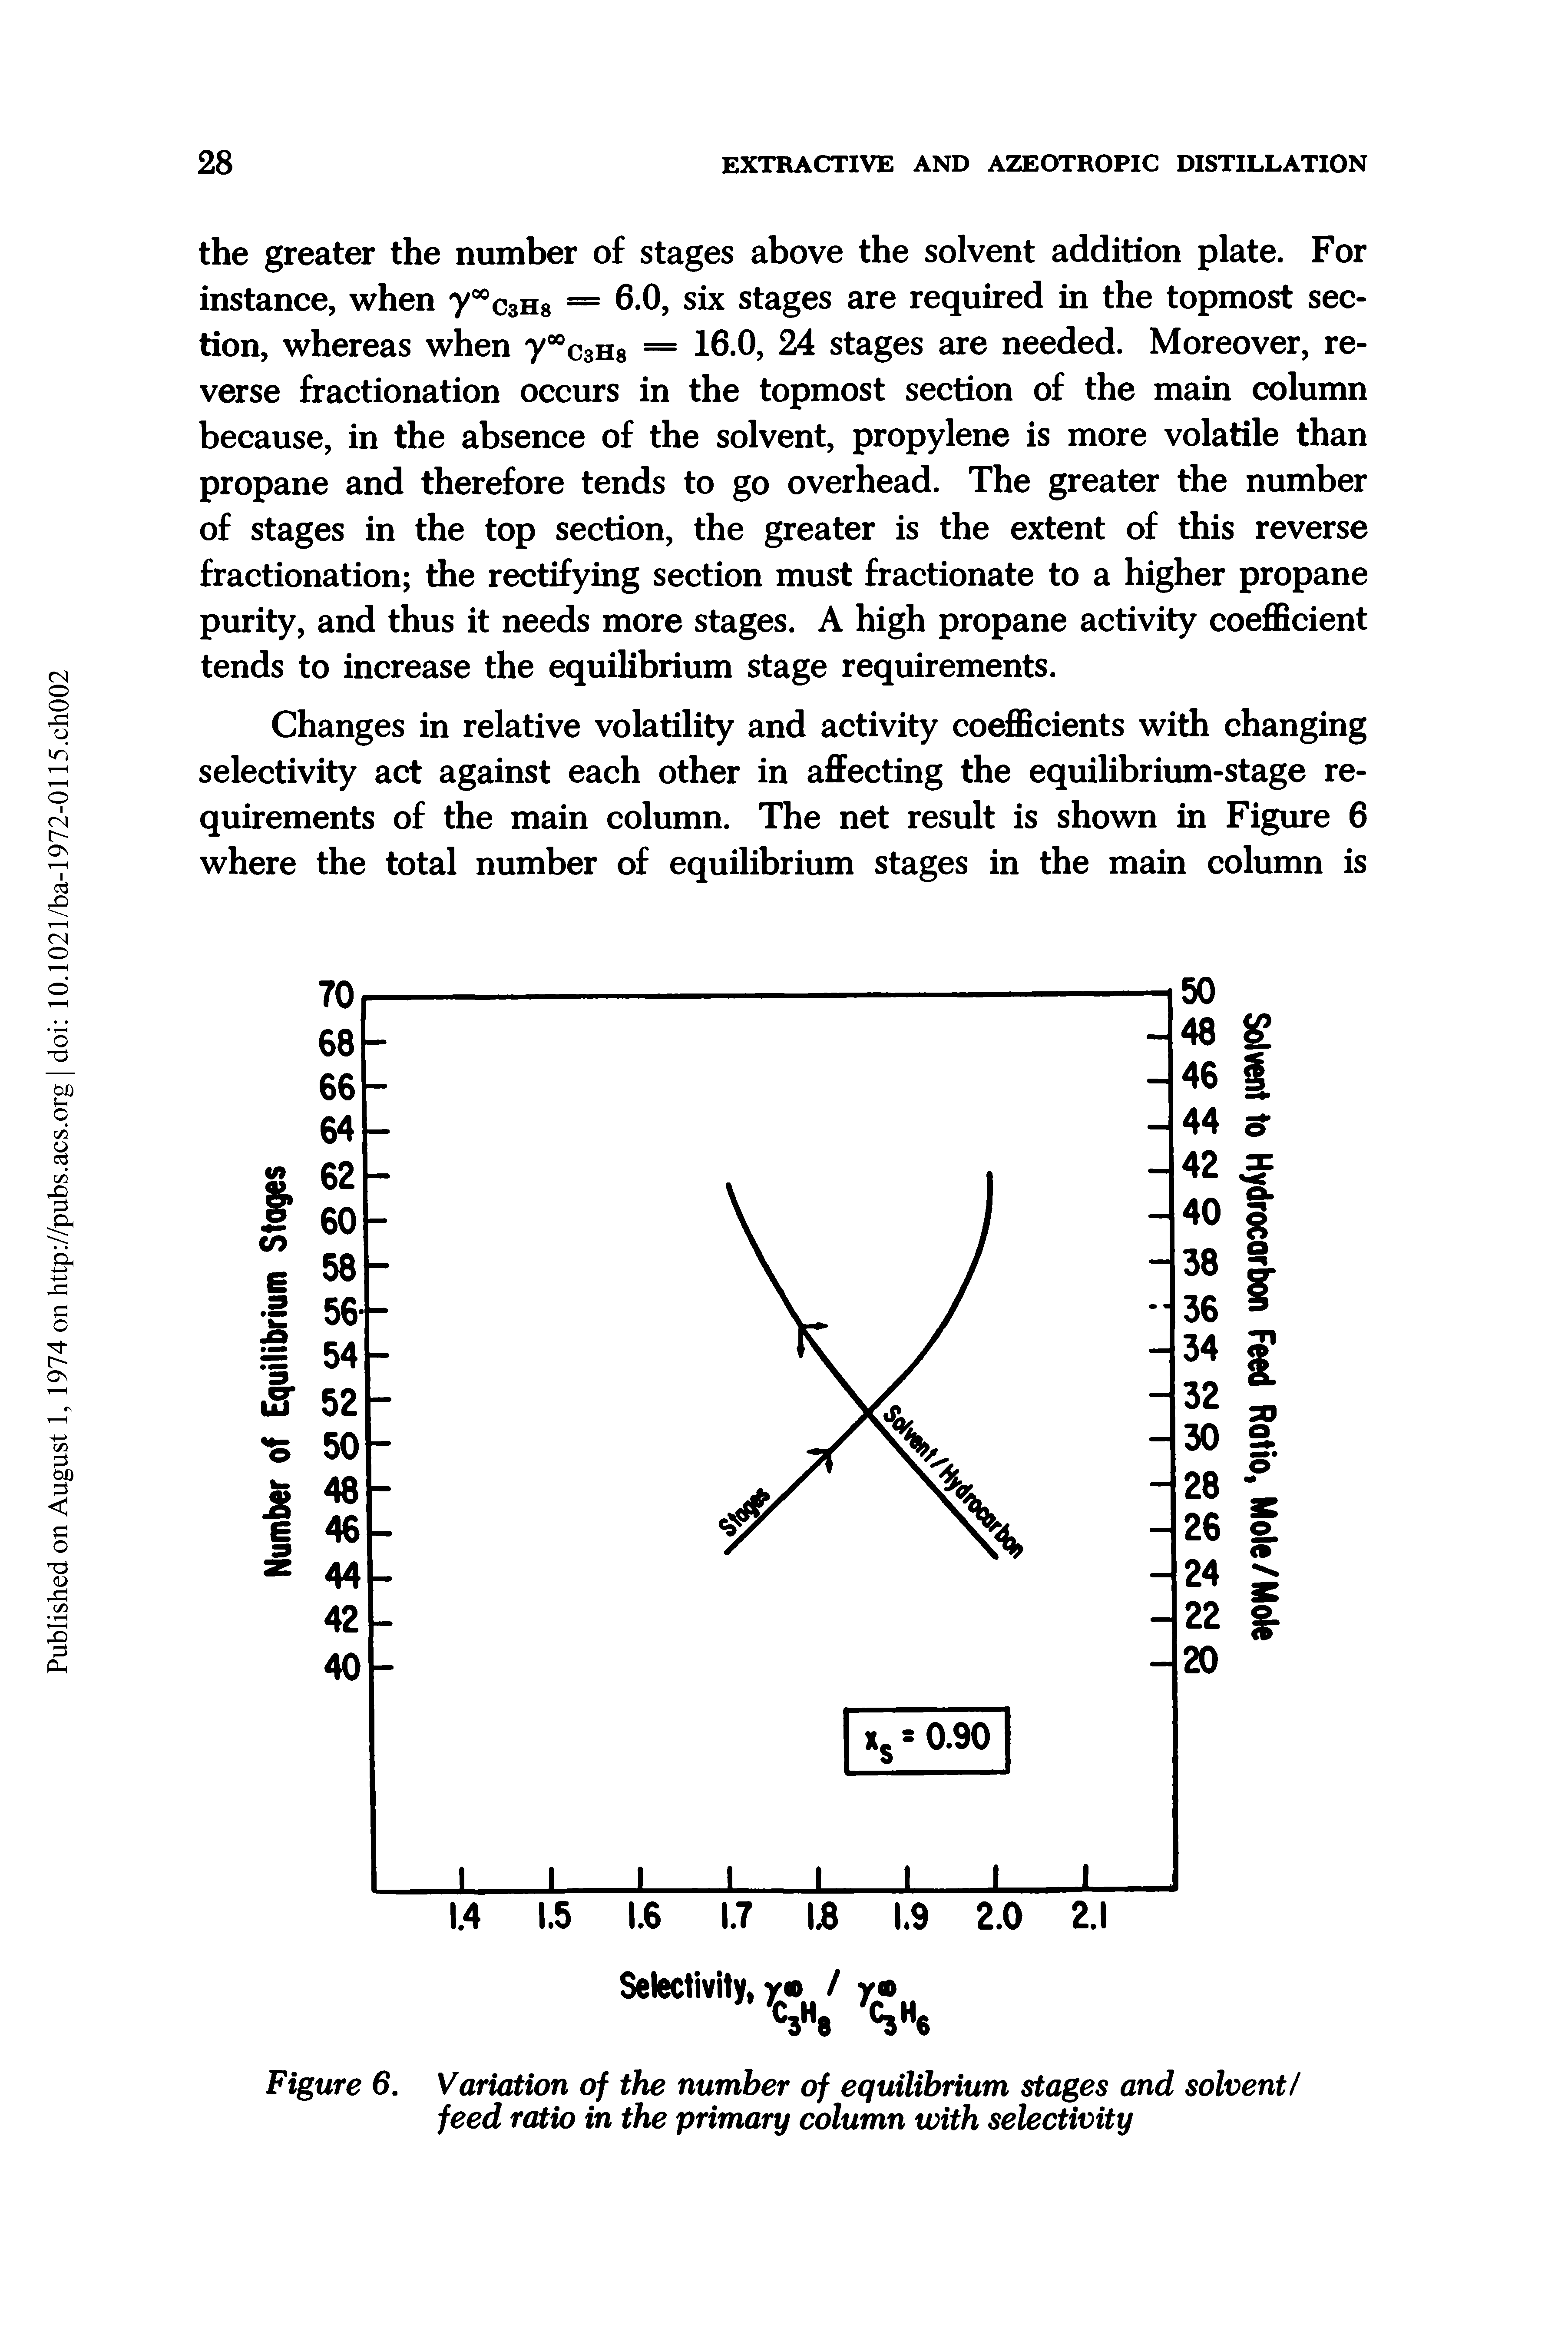 Figure 6. Variation of the number of equilibrium stages and solvent/ feed ratio in the primary column with selectivity...